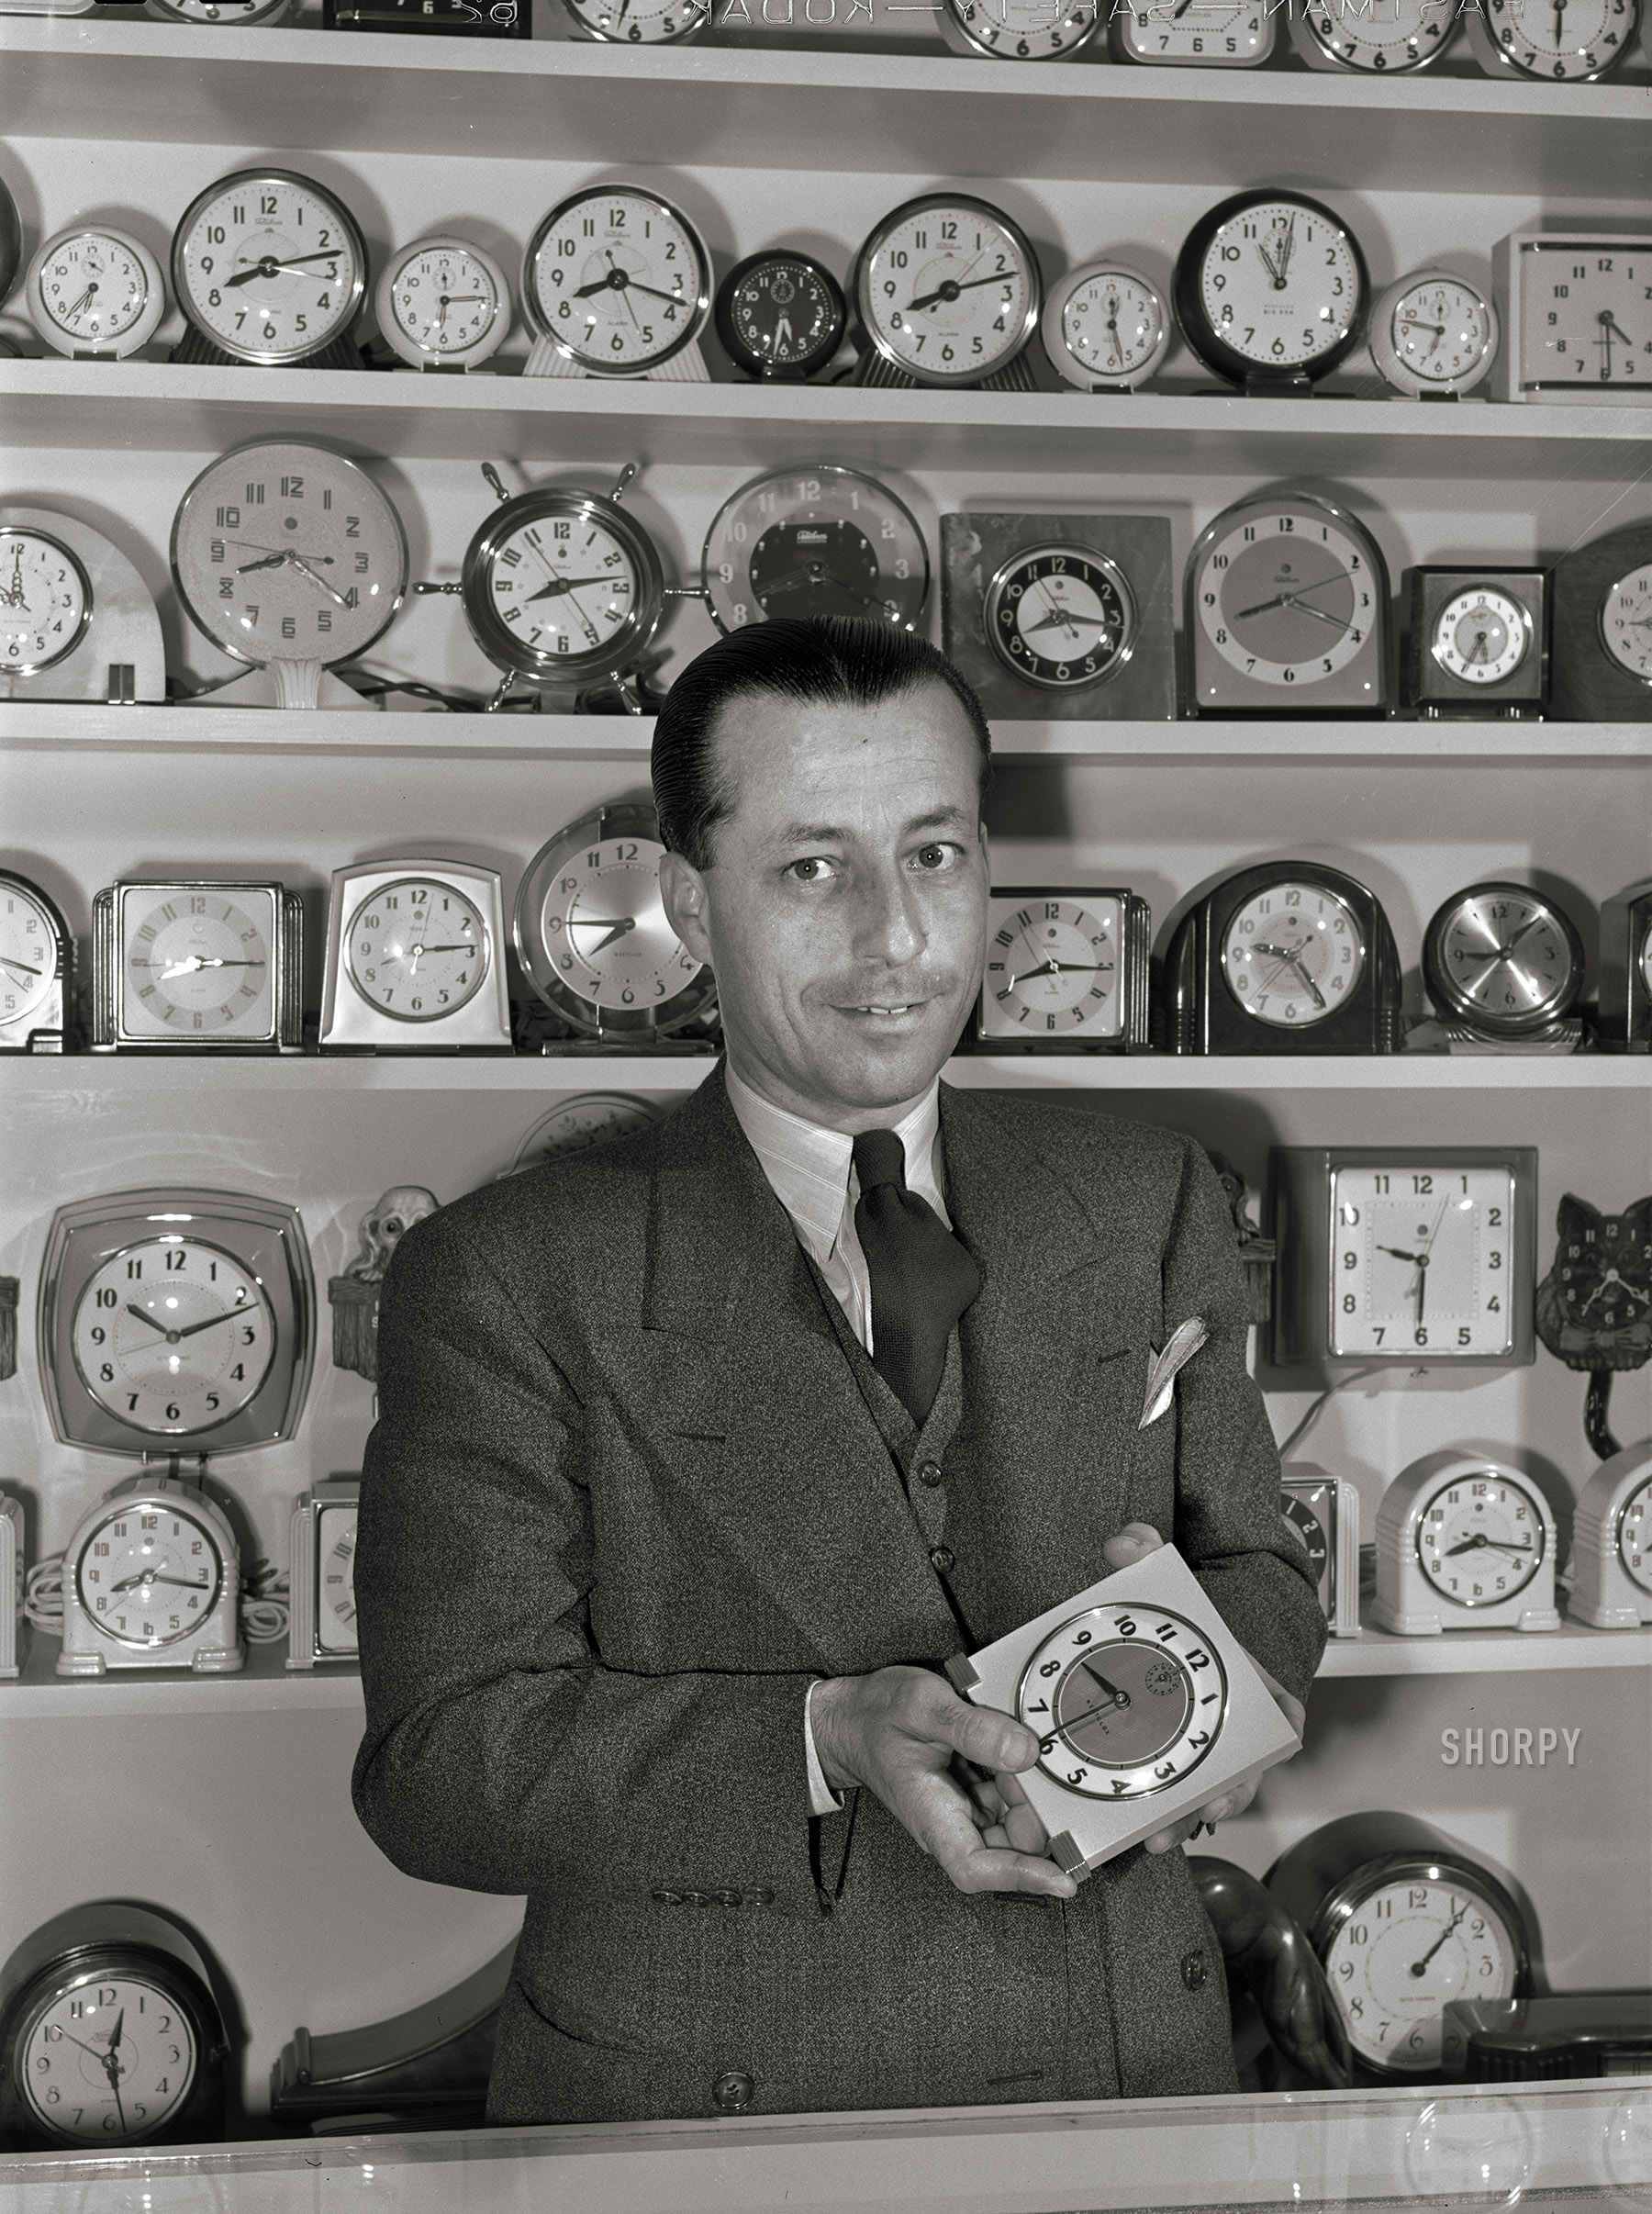 April 1942. "Portuguese-Americans in California. Mr. H. Ormond, who is a leading jeweler in San Leandro, came to the United States from the Azores Islands 23 years ago when he was 17 years old. For three years he lived in San Francisco and then moved to Oakland, where he worked in a jewelry store for ten years. In 1932 he opened his own store in San Leandro. Mr. Ormond and his wife have worked long hours to build their establishment and now hold a respected position in the social and business life of San Leandro. Mr. Ormond said, 'I received my education as a boy in the Azores but I have found that all the things that I learned there as well as the principles of honesty and integrity and thrift and industry that my parents taught me have served me well in my adopted country. While I now speak a different language, all the principles of life in the United States and the Azores are the same'." Photo by Russell Lee for the Foreign Information Service of the U.S. Office of Coordinator of Information. View full size.